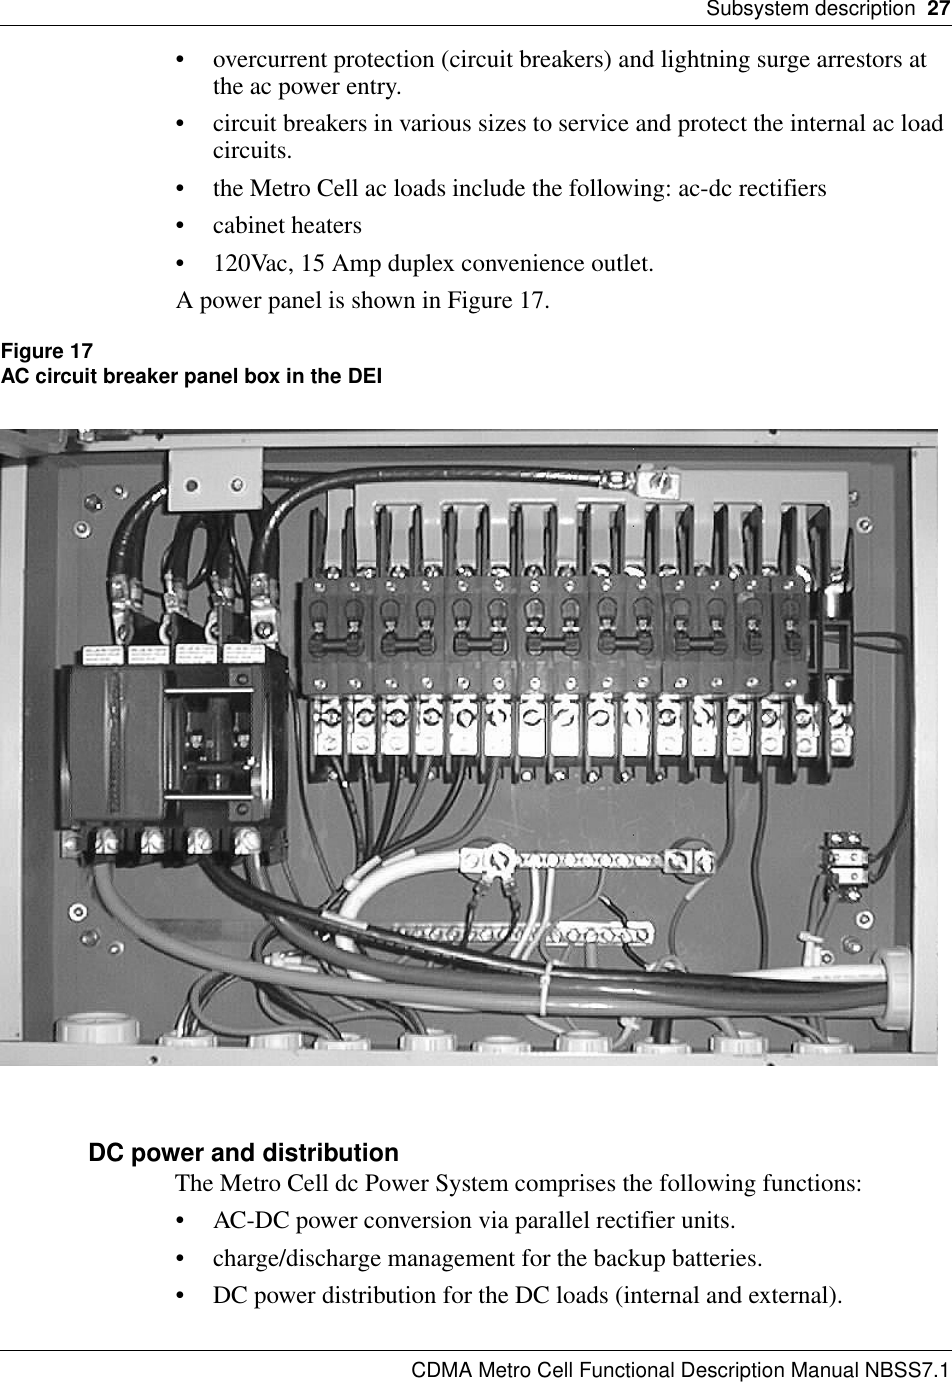 Subsystem description  27CDMA Metro Cell Functional Description Manual NBSS7.1• overcurrent protection (circuit breakers) and lightning surge arrestors at the ac power entry.• circuit breakers in various sizes to service and protect the internal ac load circuits.• the Metro Cell ac loads include the following: ac-dc rectifiers• cabinet heaters• 120Vac, 15 Amp duplex convenience outlet.A power panel is shown in Figure 17.Figure 17AC circuit breaker panel box in the DEIDC power and distributionThe Metro Cell dc Power System comprises the following functions:• AC-DC power conversion via parallel rectifier units.• charge/discharge management for the backup batteries.• DC power distribution for the DC loads (internal and external).